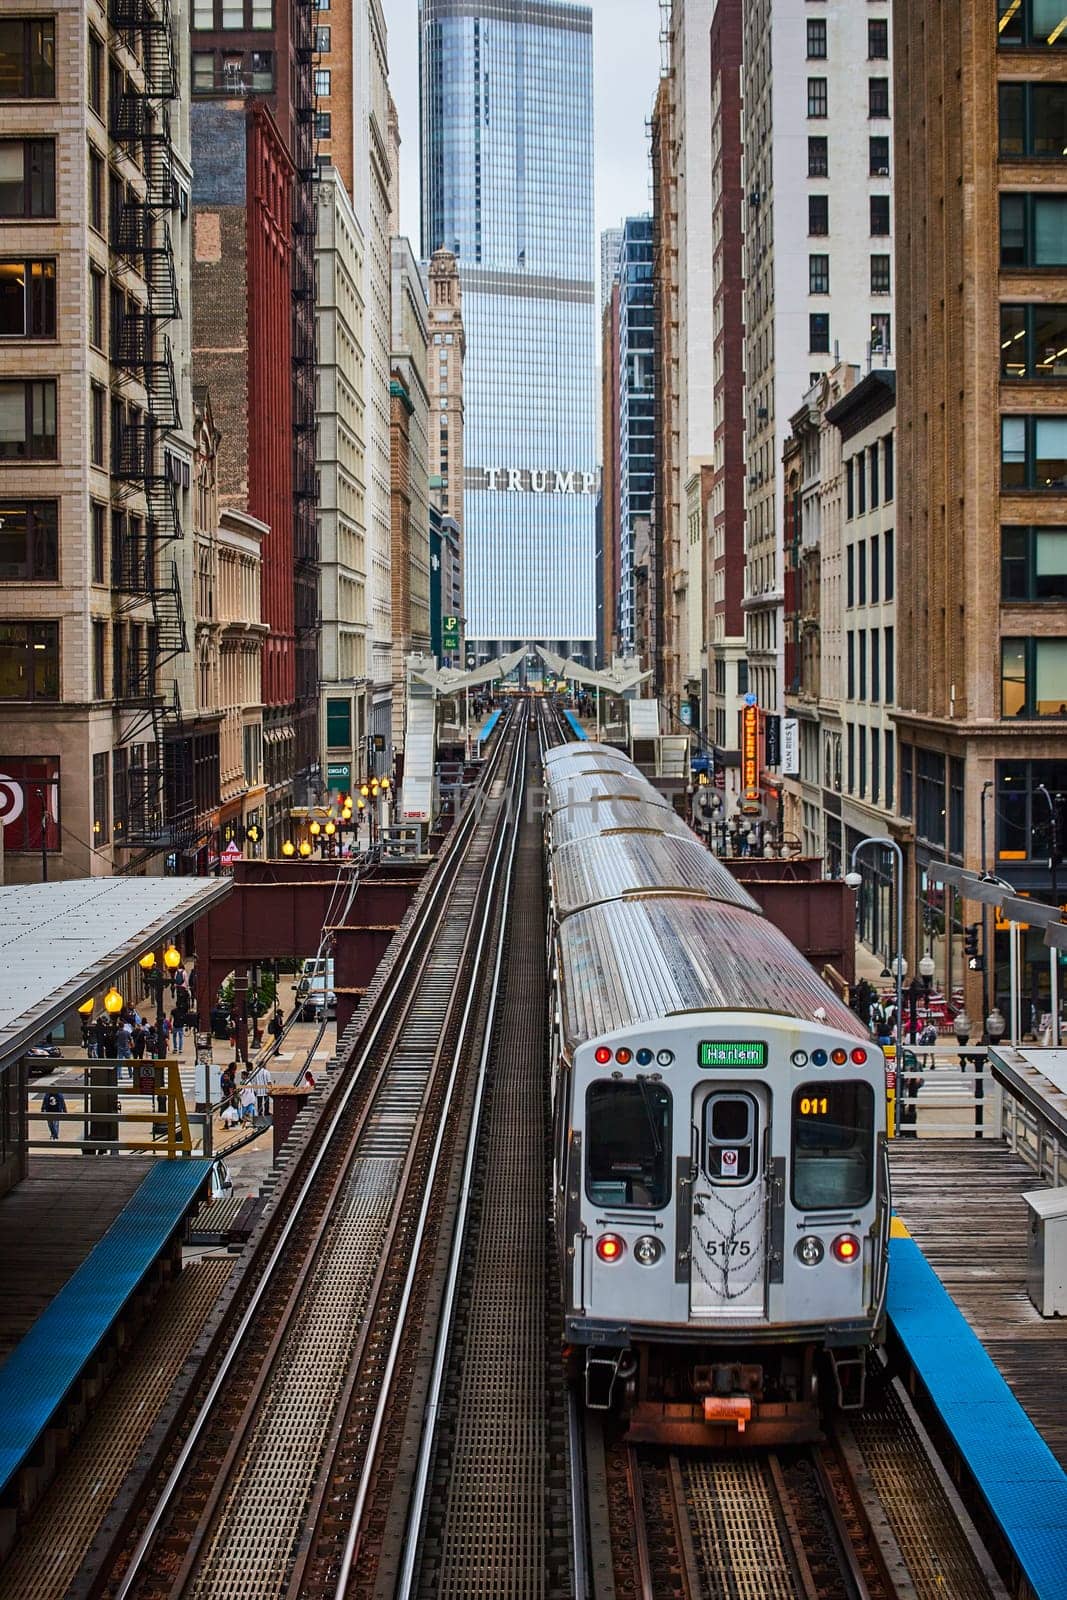 Elevated Train in Urban Chicago with Commuters and Architecture by njproductions